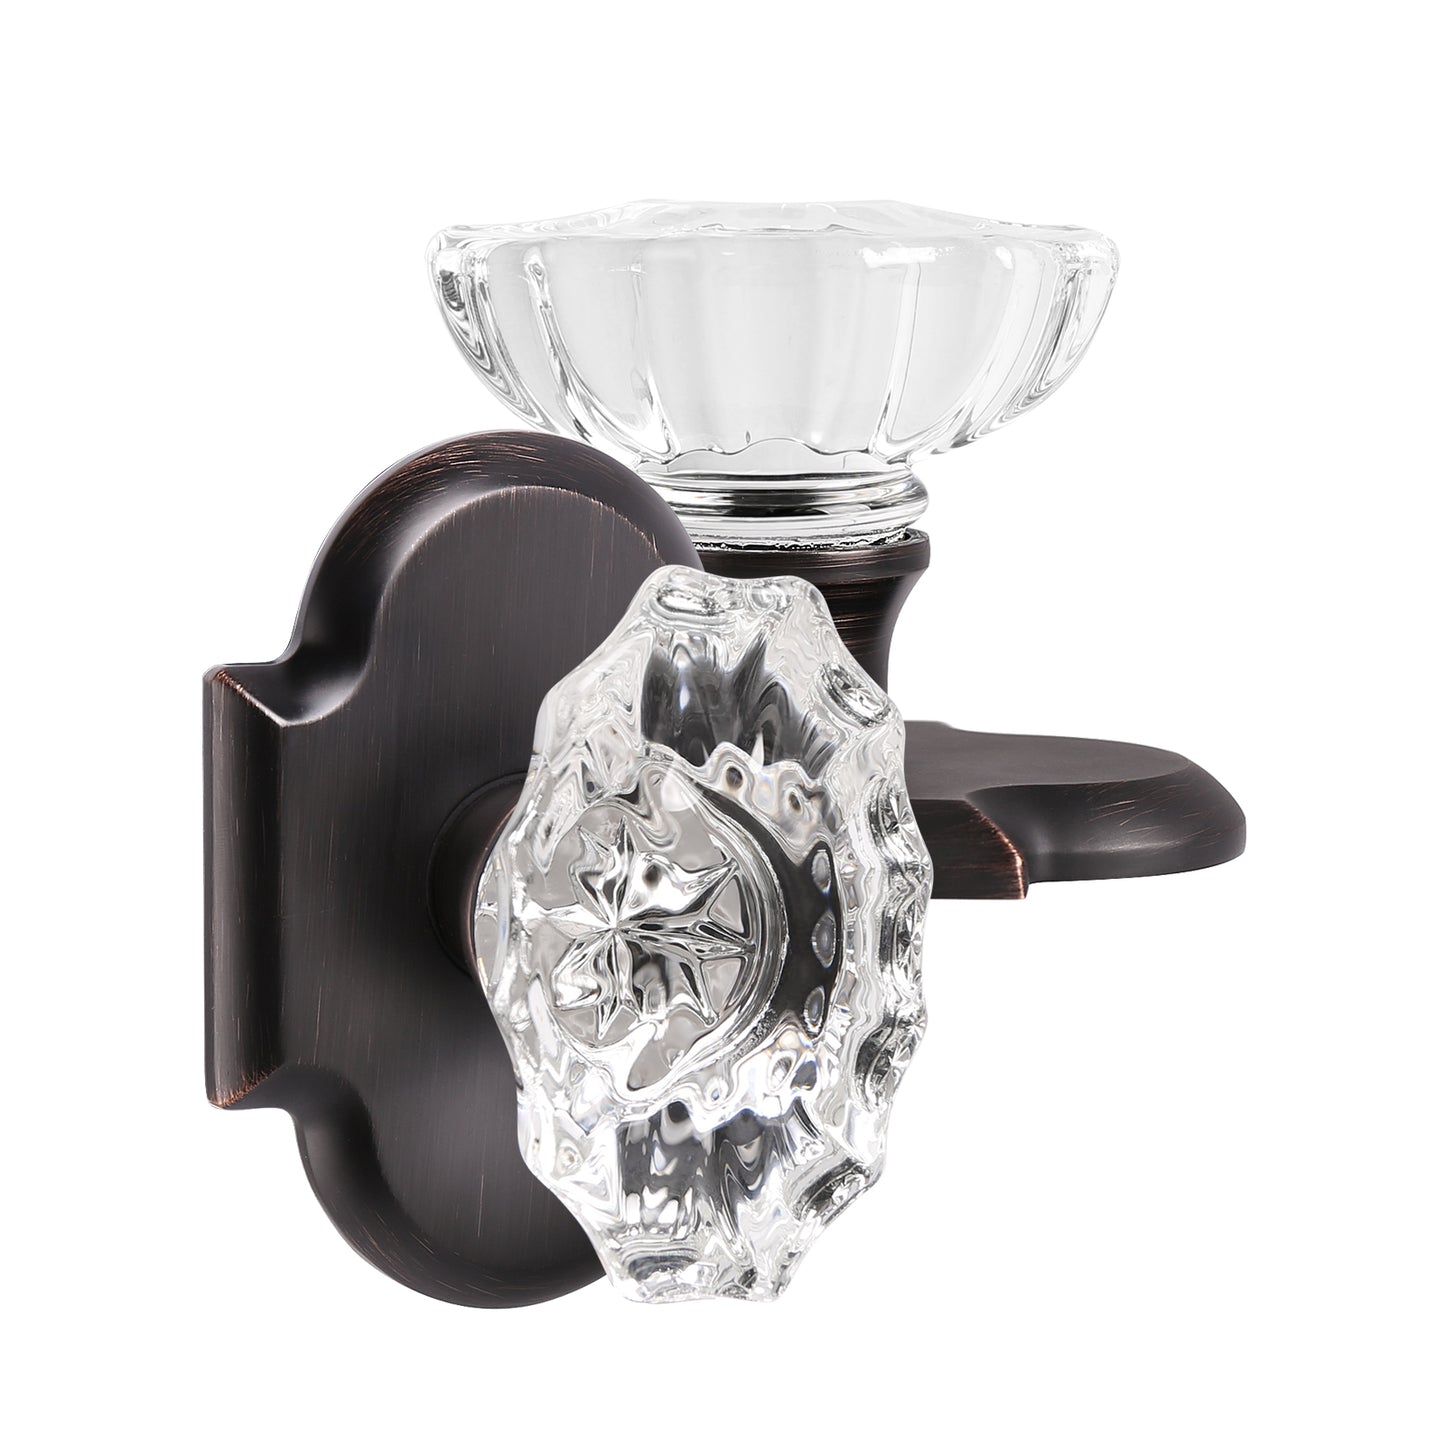 Oval Style Crystal Door Knob with Oil Rubbed Bronze Arched Rosette, Passage/Privacy Knob DLC21DORB - Probrico